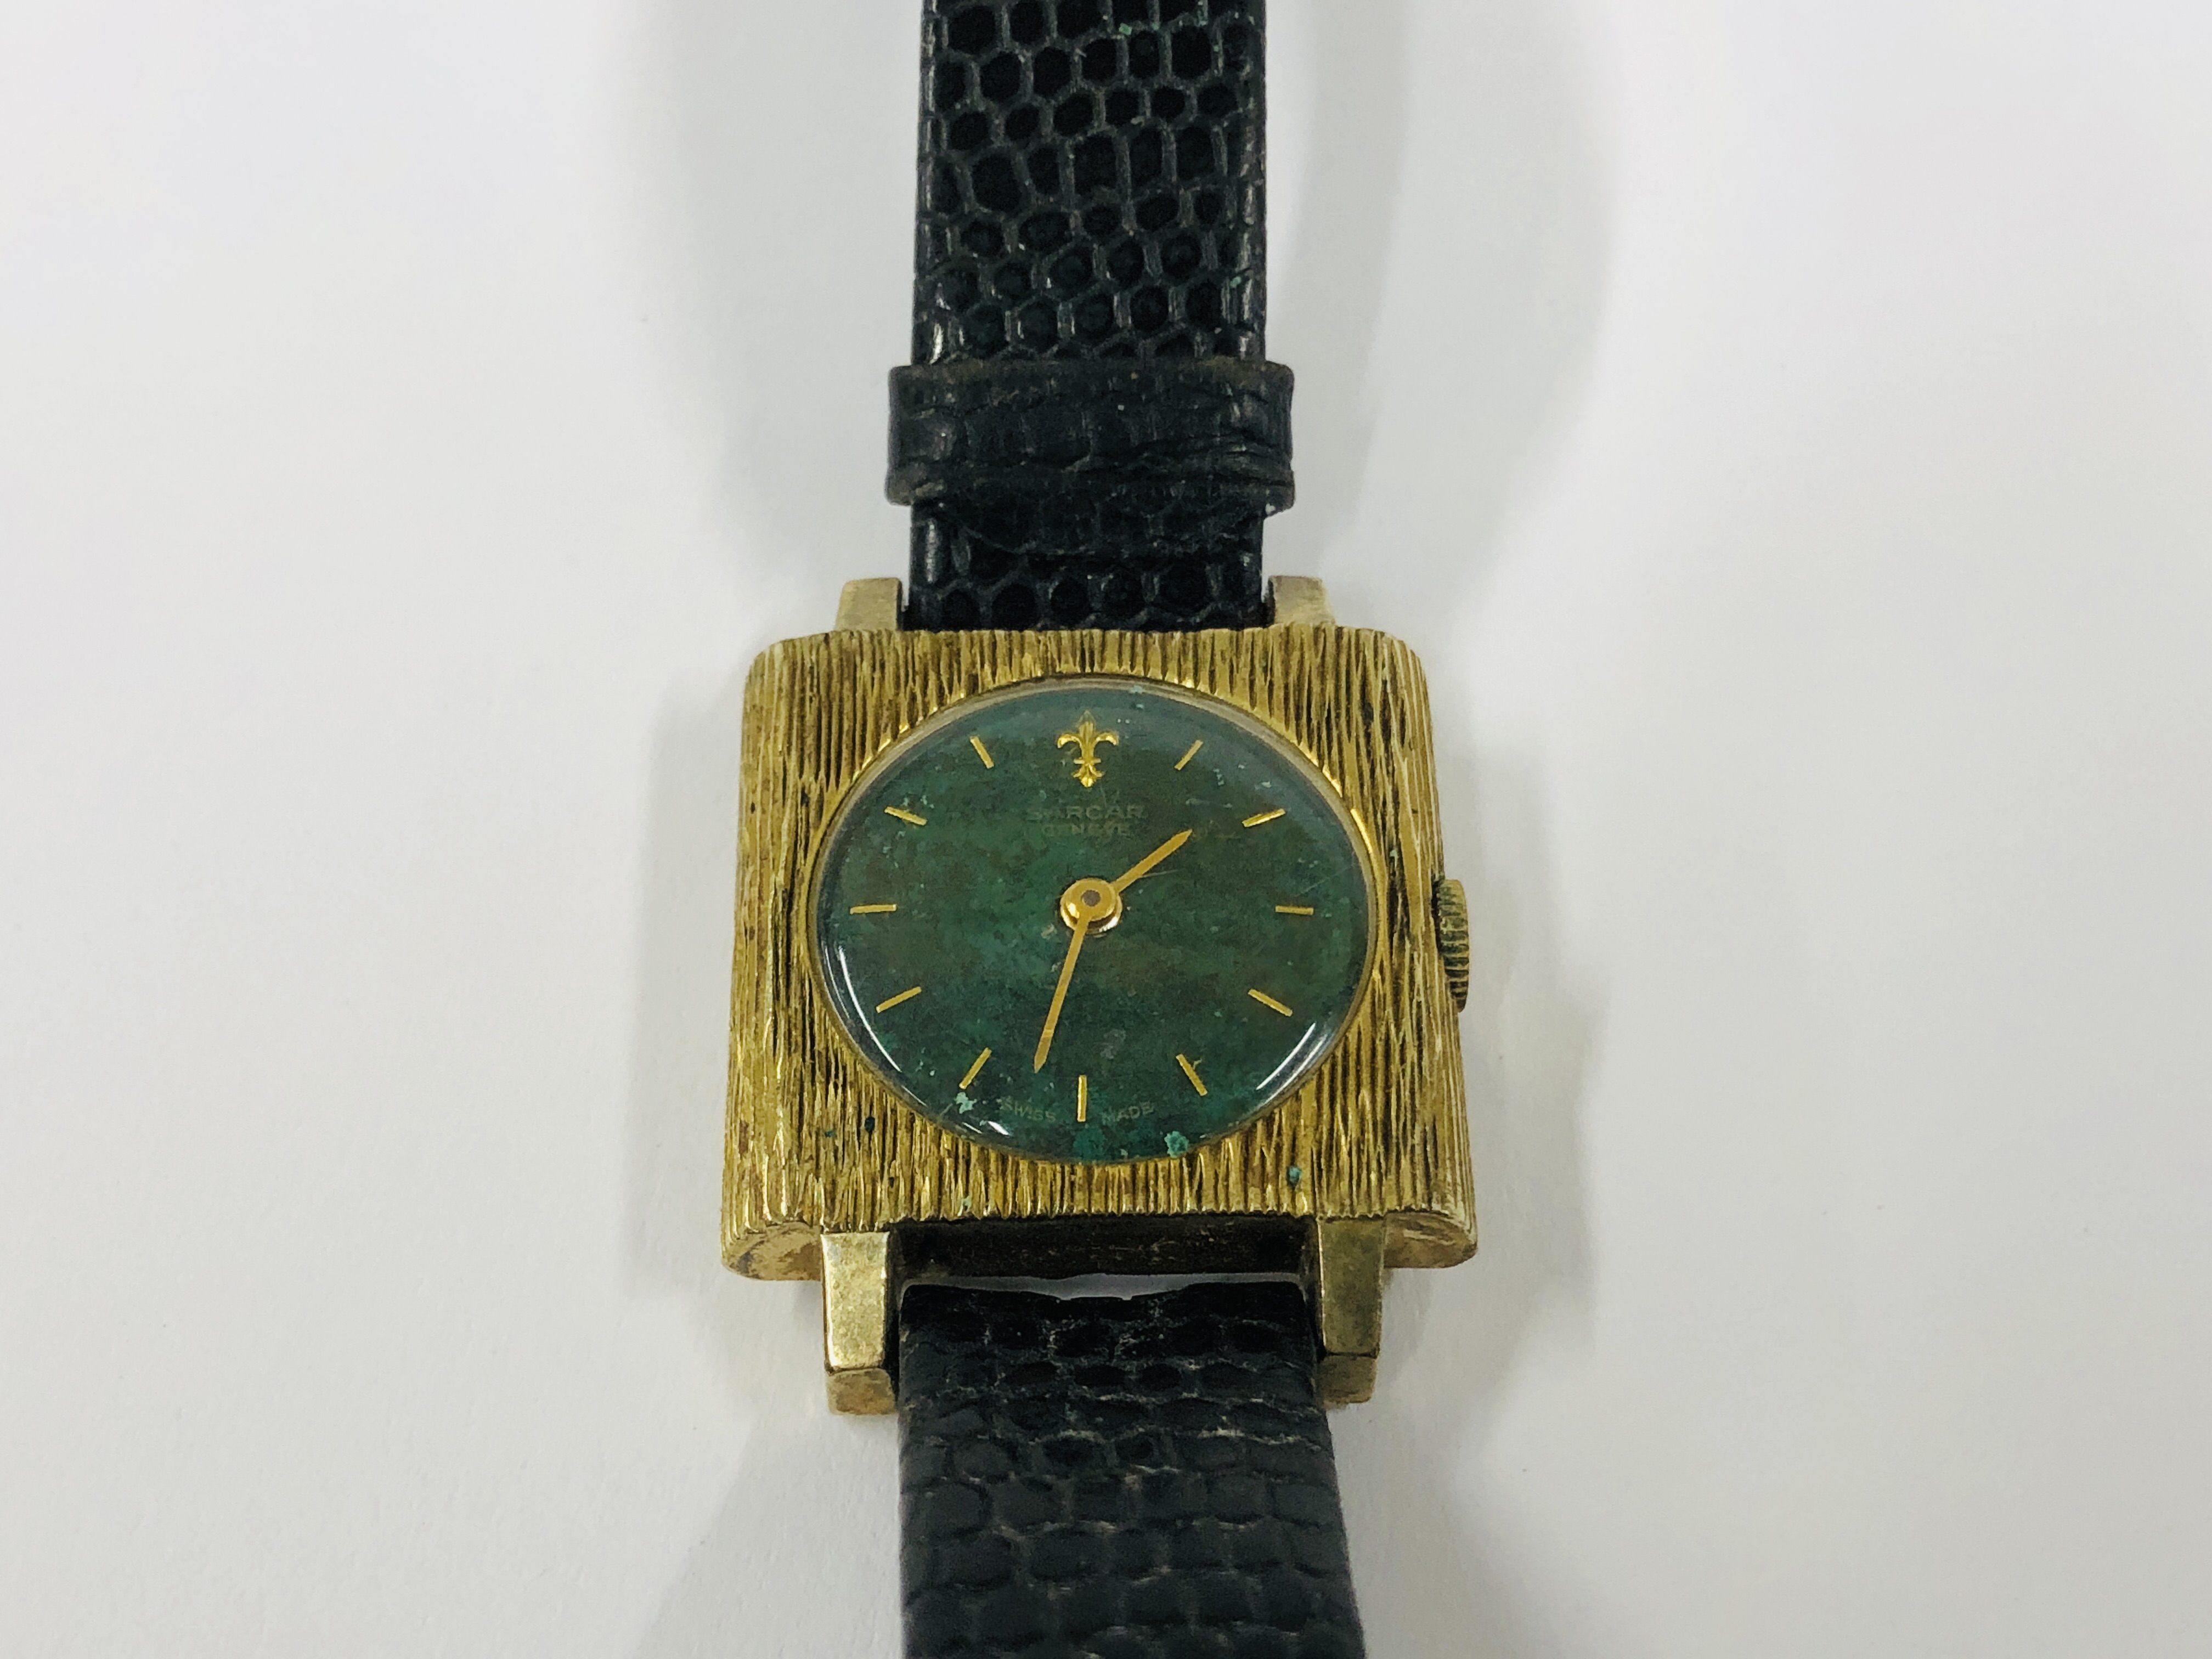 A LADIES RETRO SARCAR WRIST WATCH WITH GREEN COLOURED DIAL ON LEATHER STRAP.